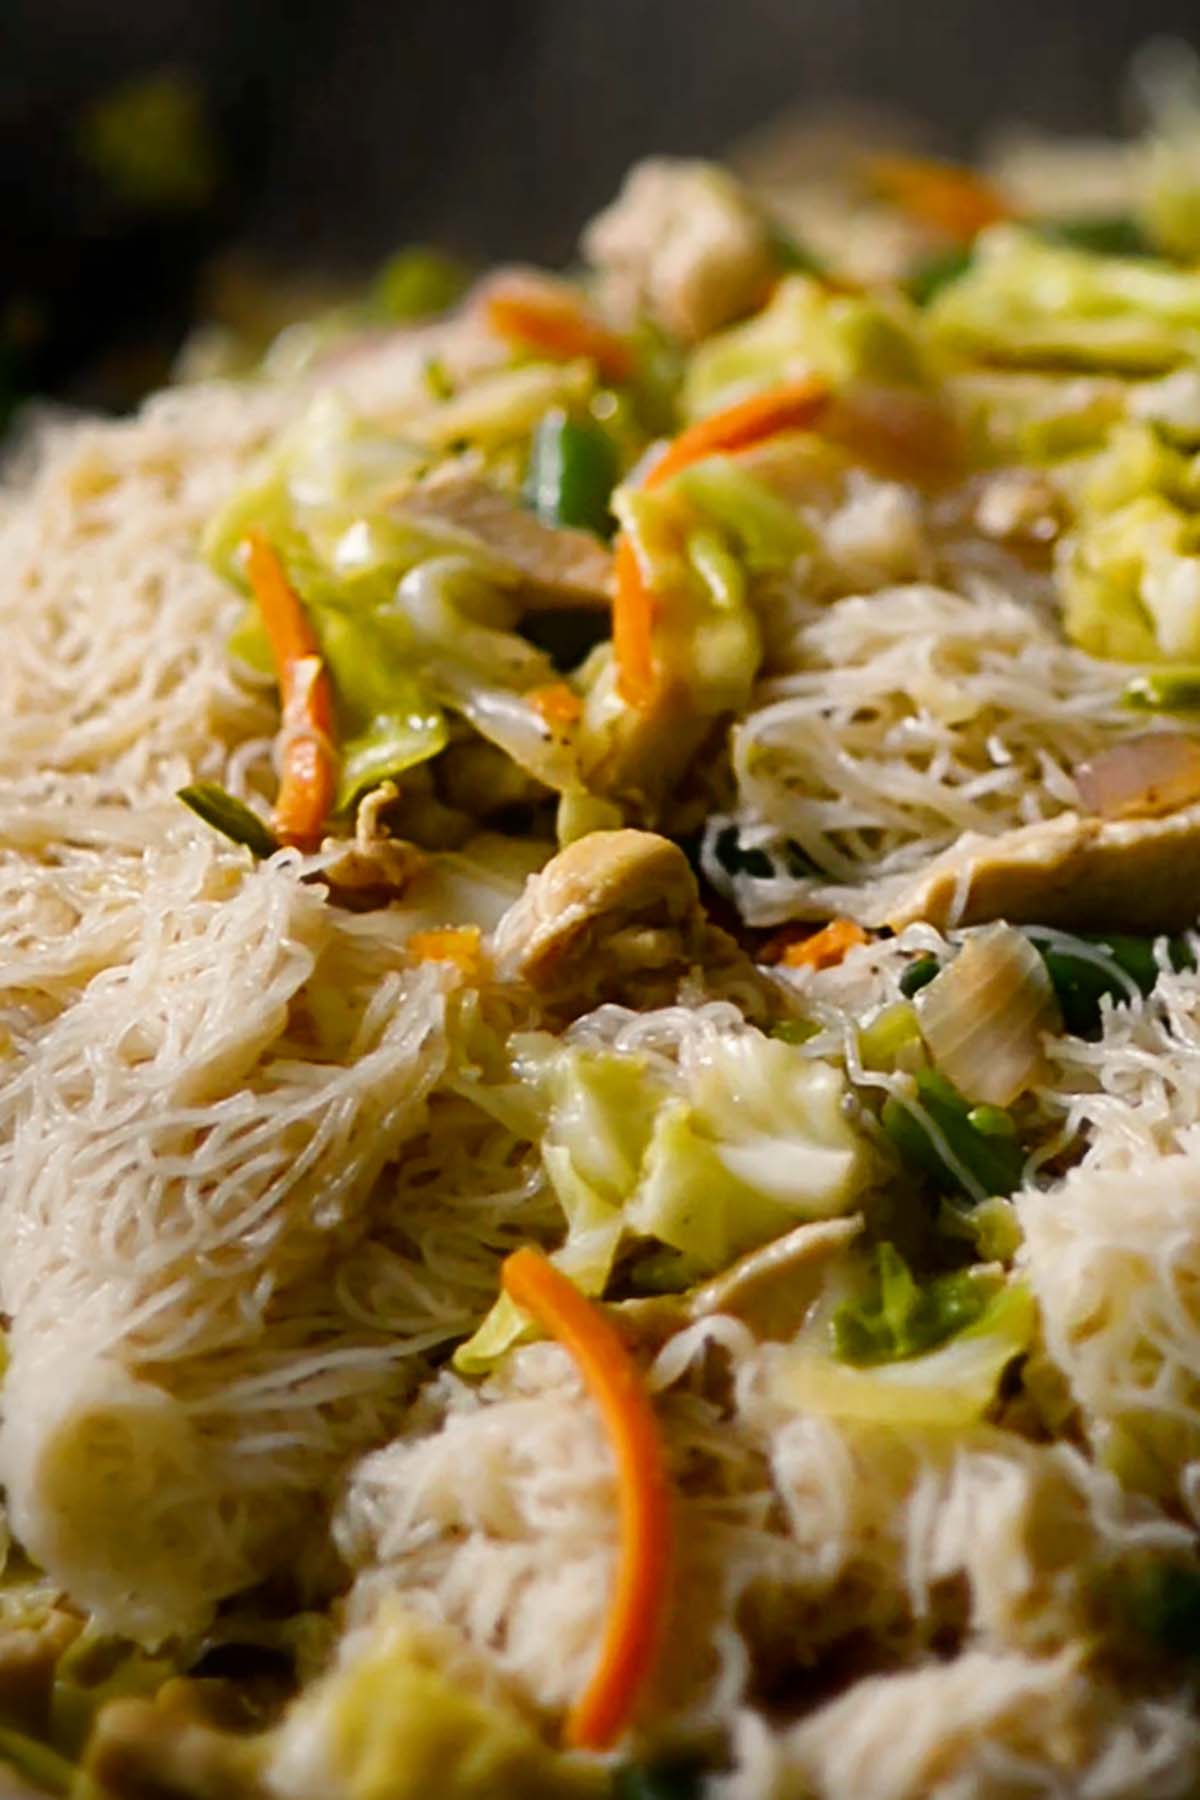 Rice Vermicelli noddles added to vegetable and chicken mixture in a hot wok.